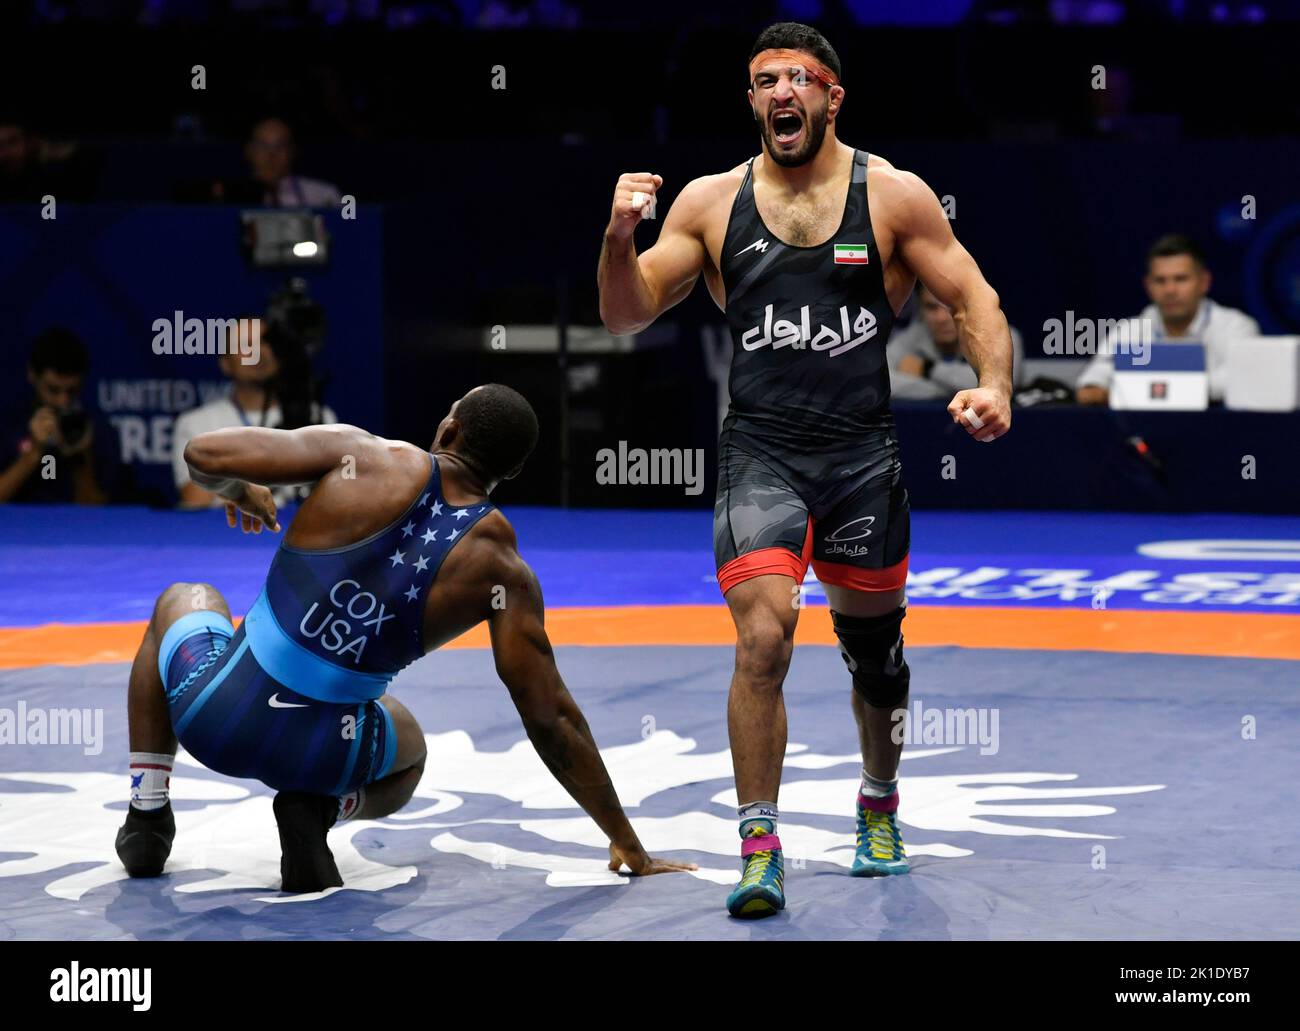 Belgrade. 17th Sep, 2022. Iran's Kamran Ghorban Ghasempour (R) celebrates victory against J'Den Michael Tbory Cox of the United States after the men's 92kg category freestyle final at the Wrestling World Championships in Belgrade, Serbia on Sept. 17, 2022. Credit: Predrag Milosavljevic/Xinhua/Alamy Live News Stock Photo